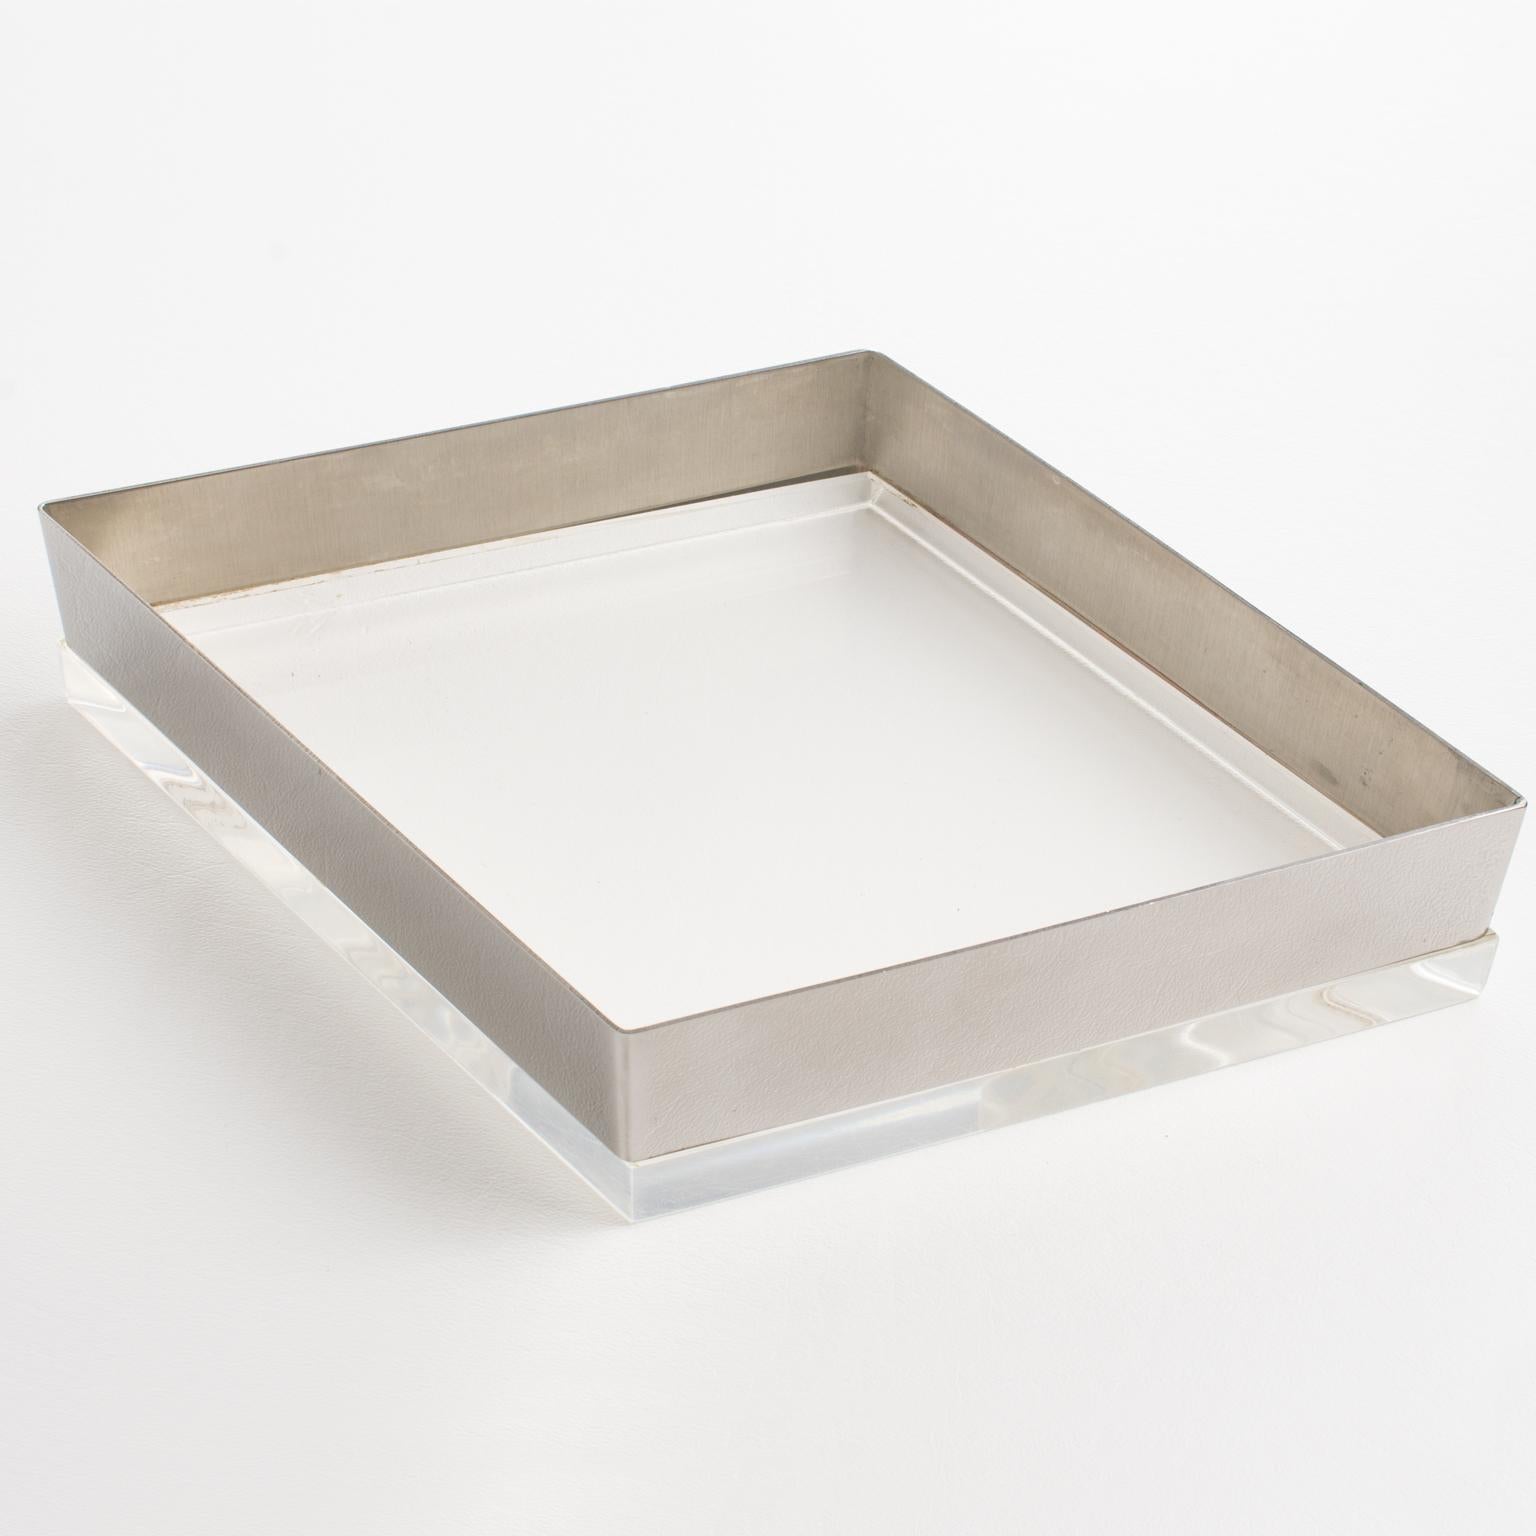 Late 20th Century Modernist Geometric Lucite and Chrome Metal Decorative Box, France 1970s For Sale